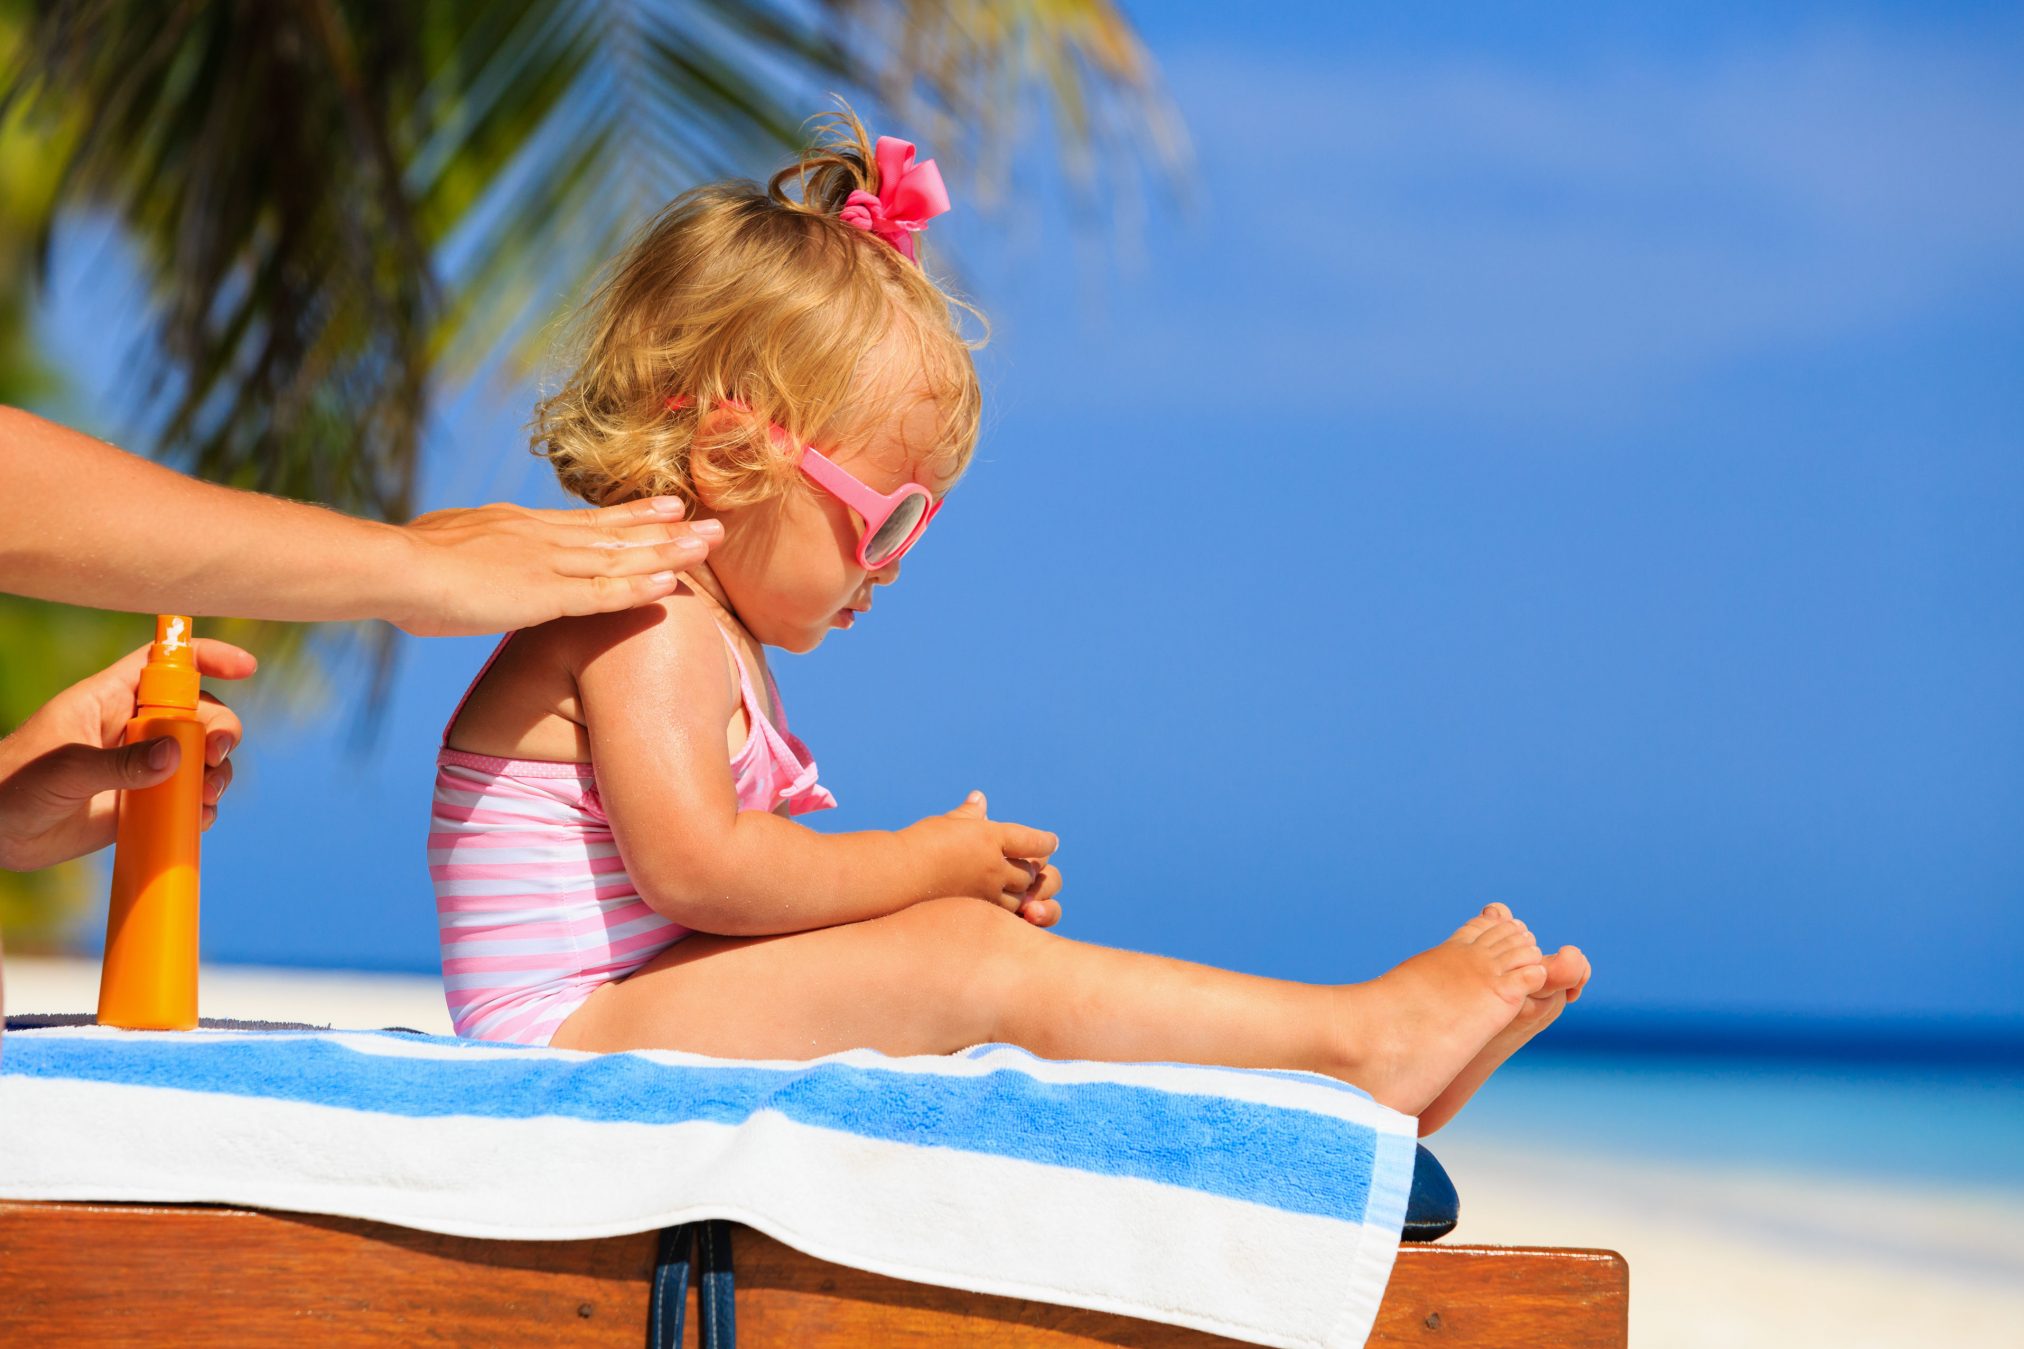 protecting children with sunscreen